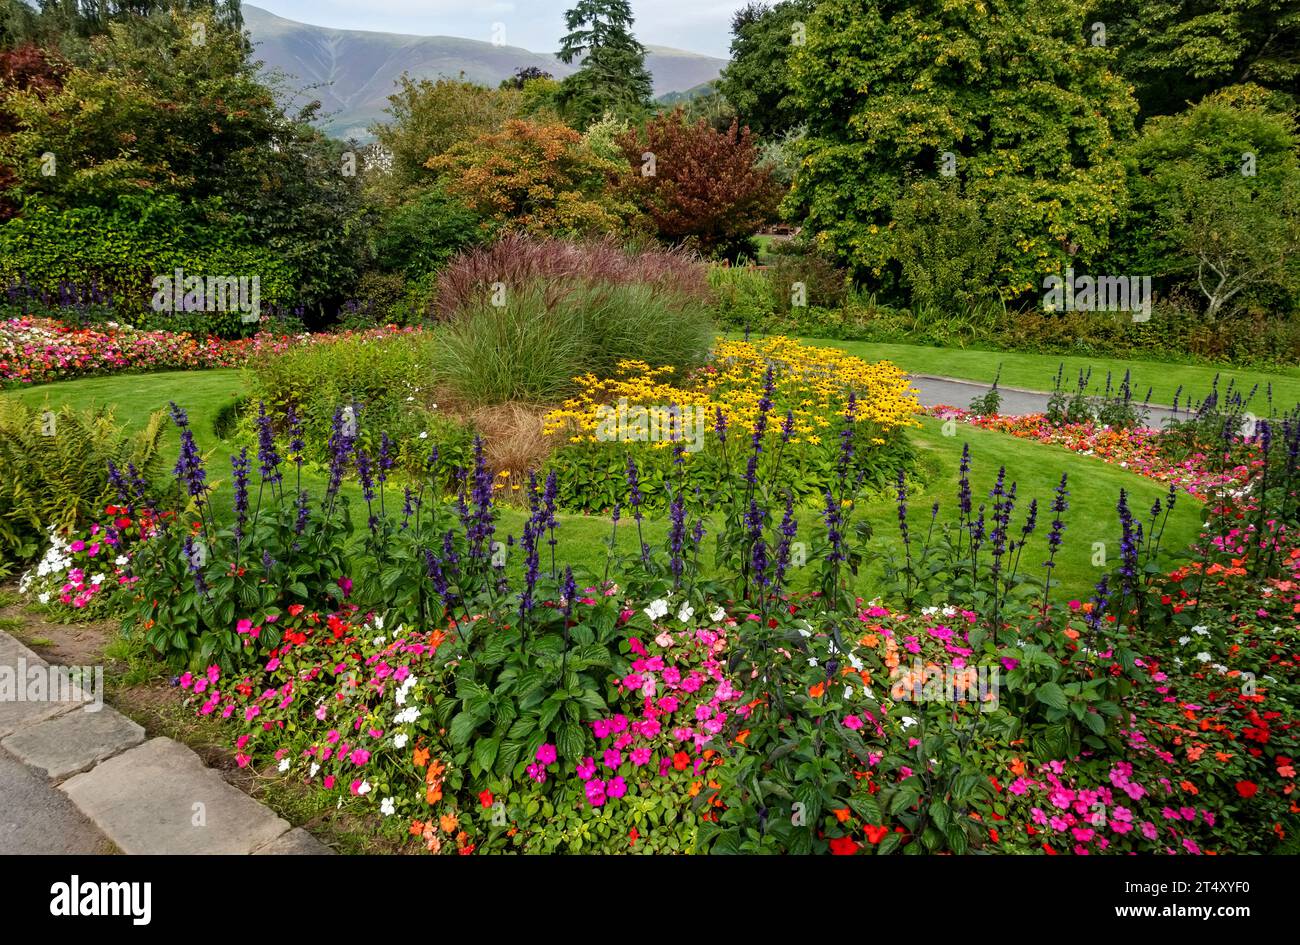 Colourful flowerbeds flowers in Hope Park public garden gardens in summer Keswick Cumbria England UK United Kingdom GB Great Britain Stock Photo